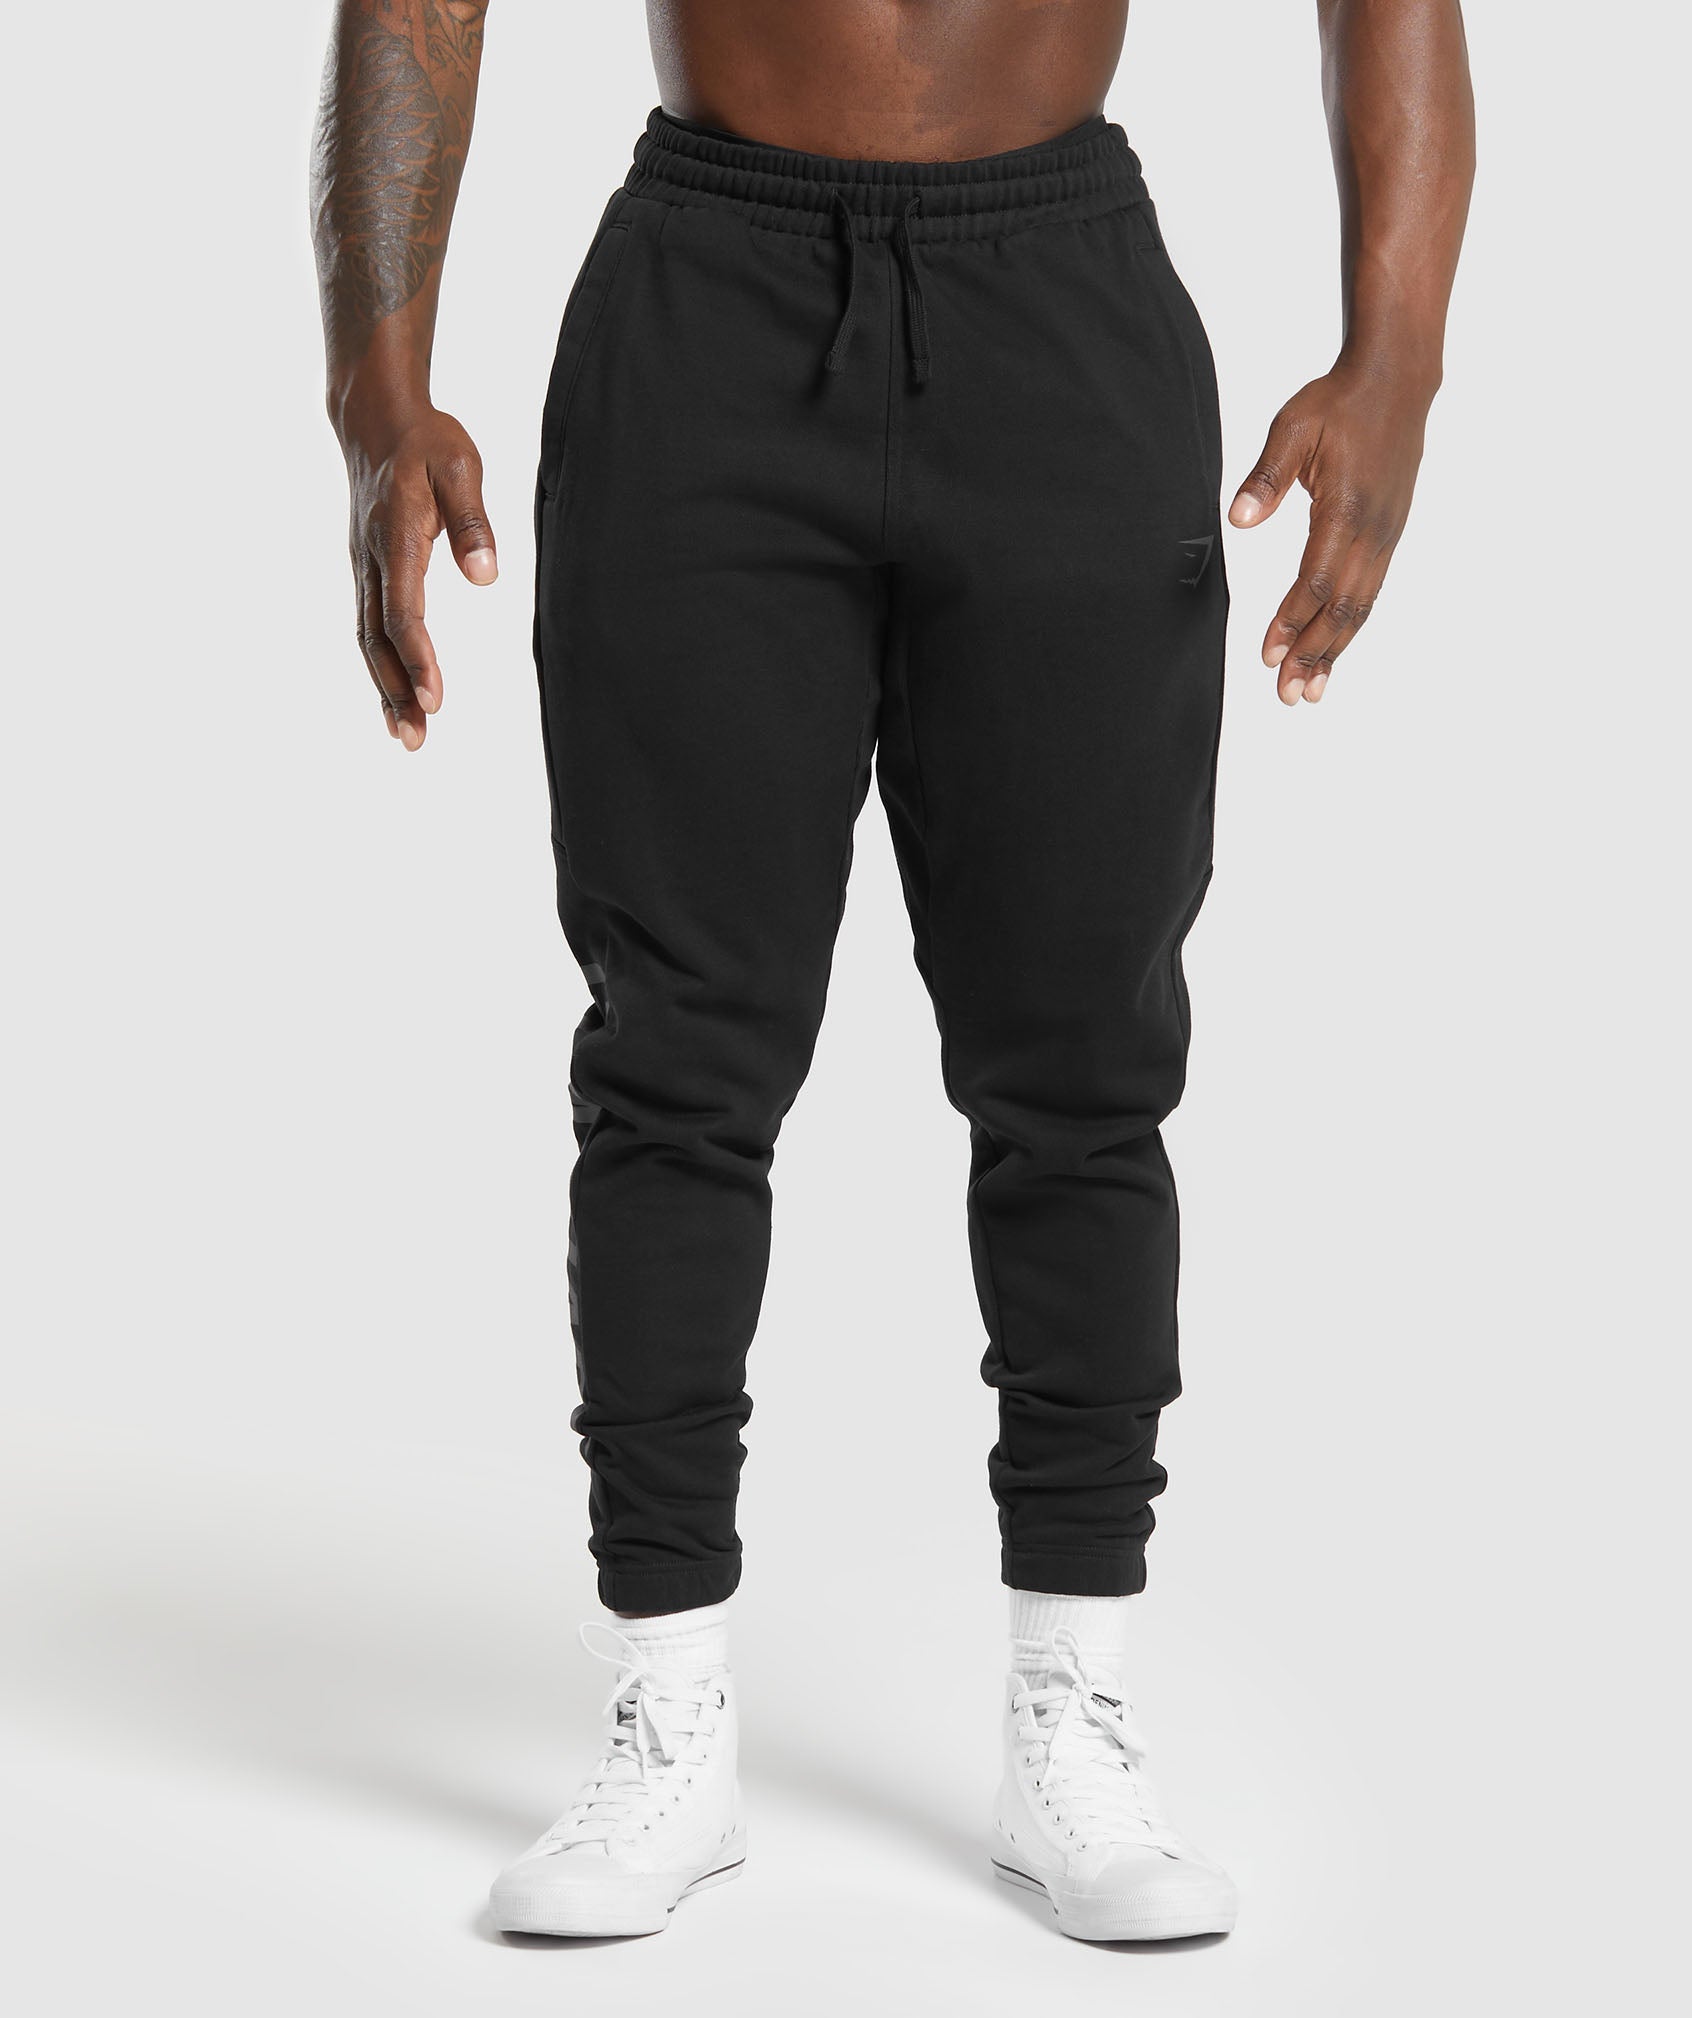 Power Joggers in Black - view 2